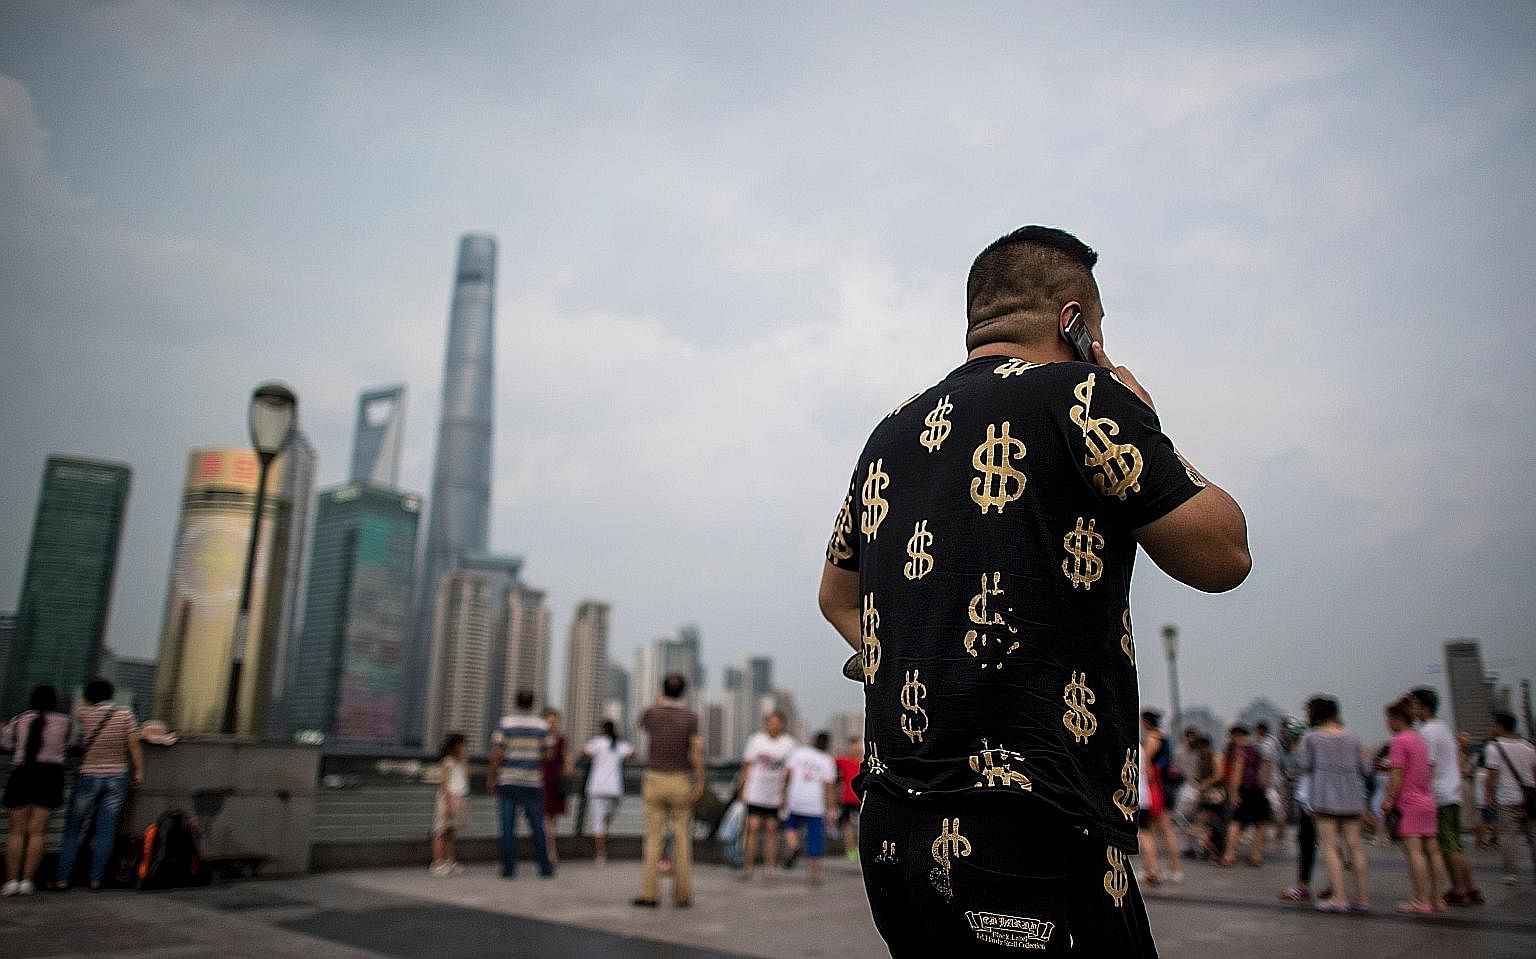 Dollars seem to be on this man's mind as he walks by Shanghai's financial district. As China's economy steadies and consumer spending increases, the prospects of many emerging markets are also improving.